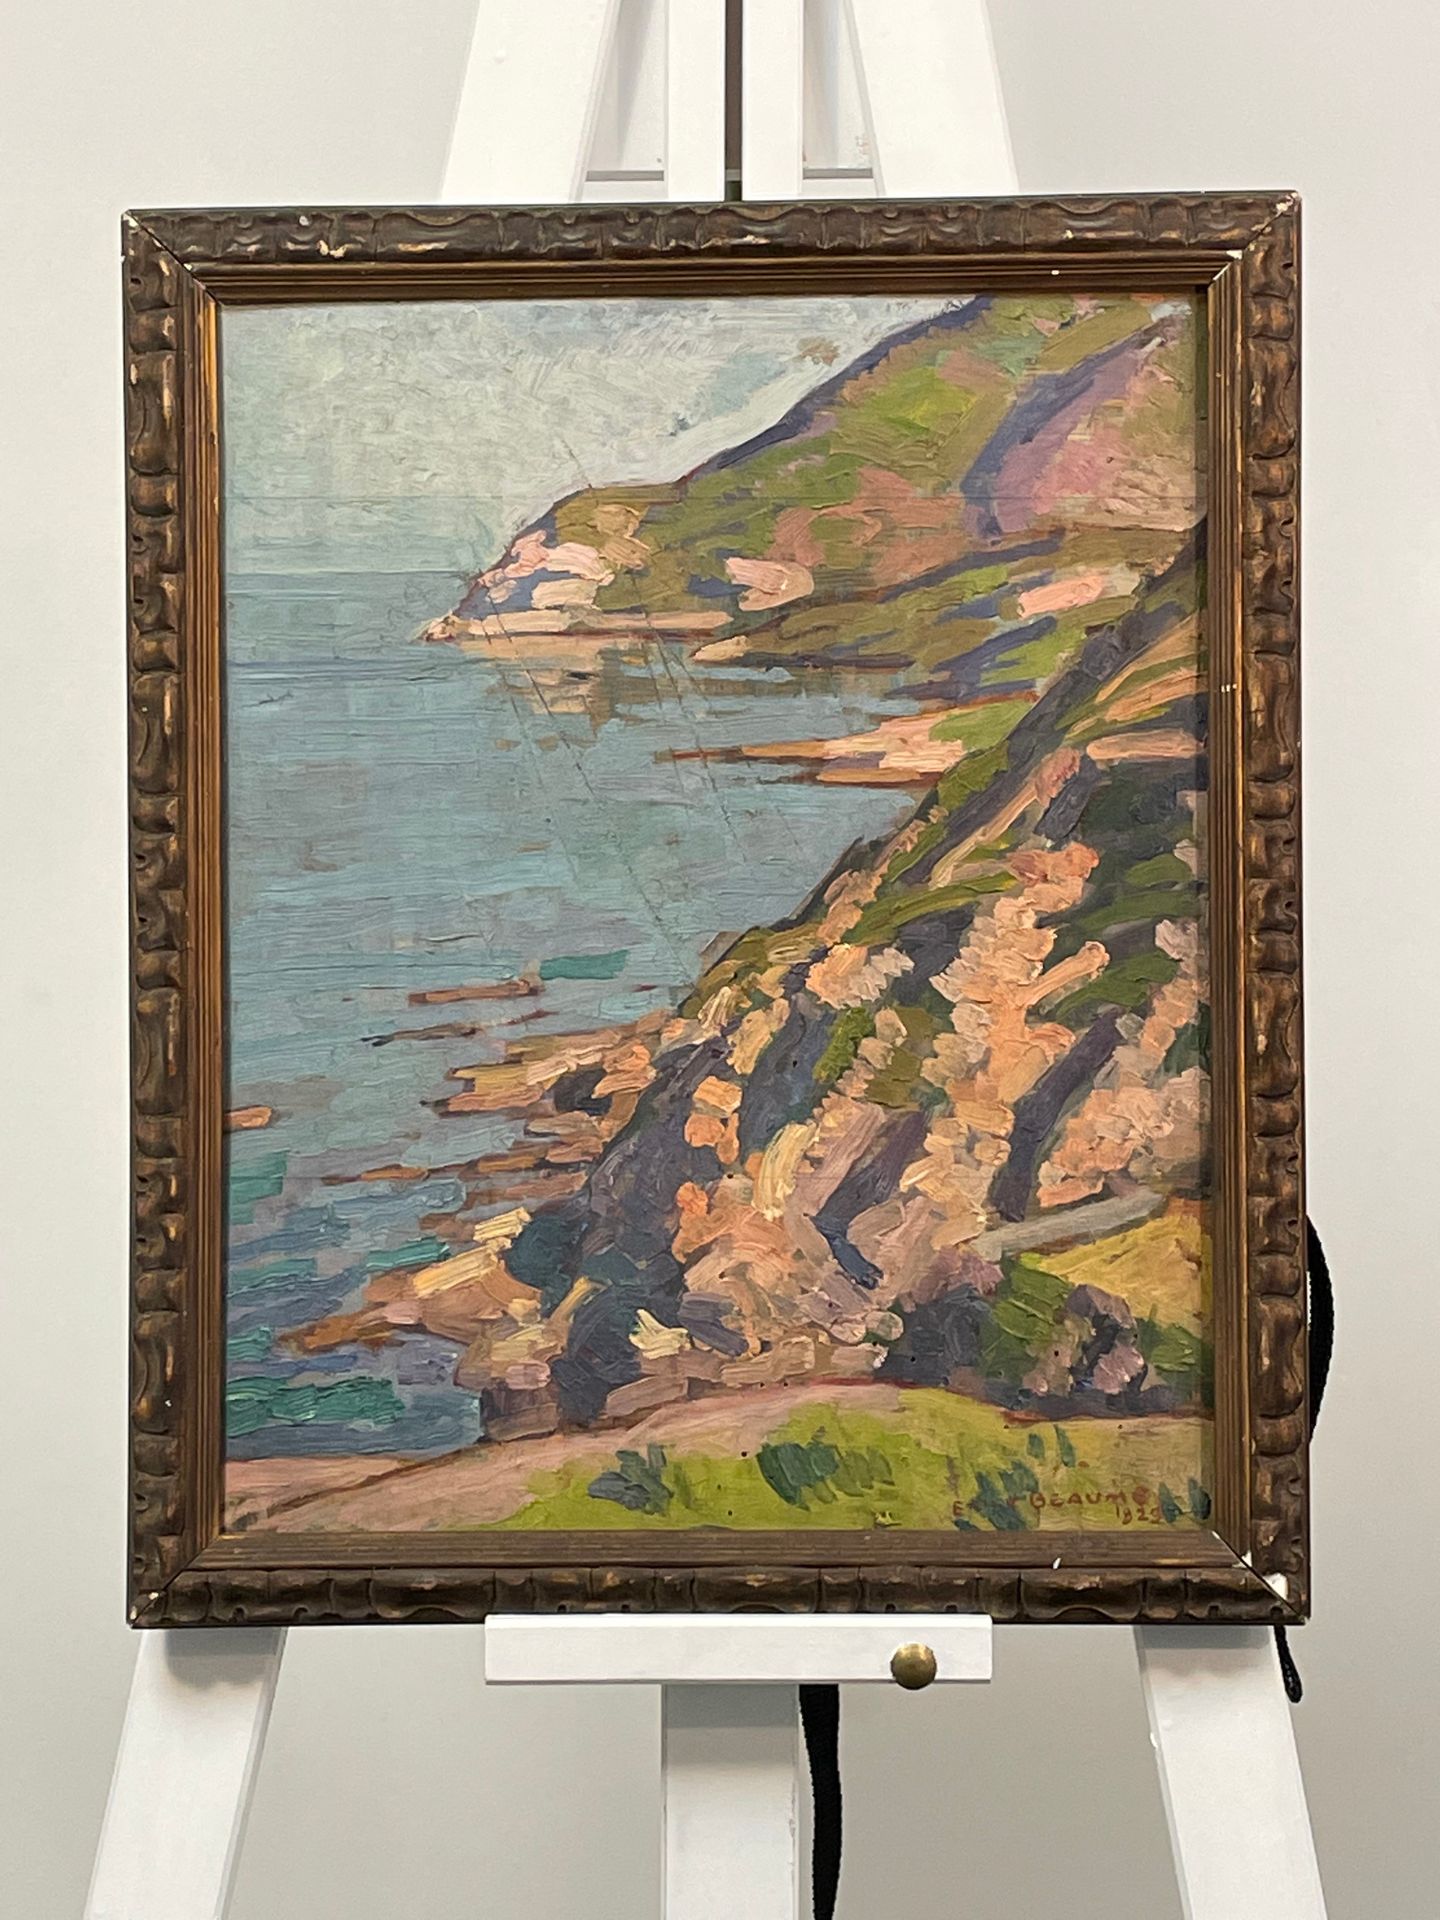 Null "Seaside, 1929" - Émile Marie Beaume 

Oil on wood, signed lower right.

Di&hellip;